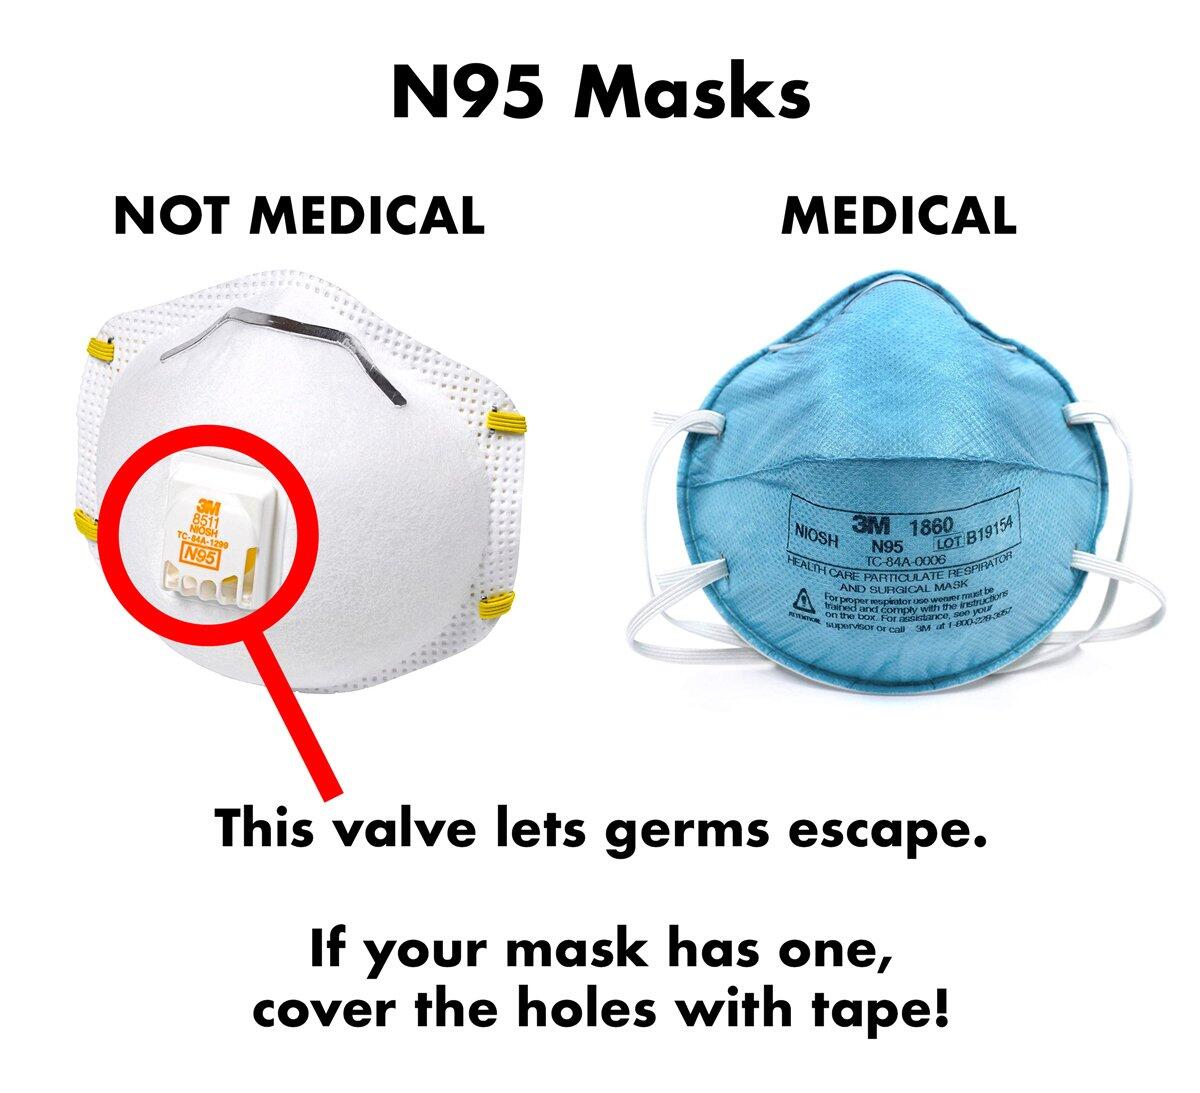 Nonmedical N95 masks have a valve can let germs escape.